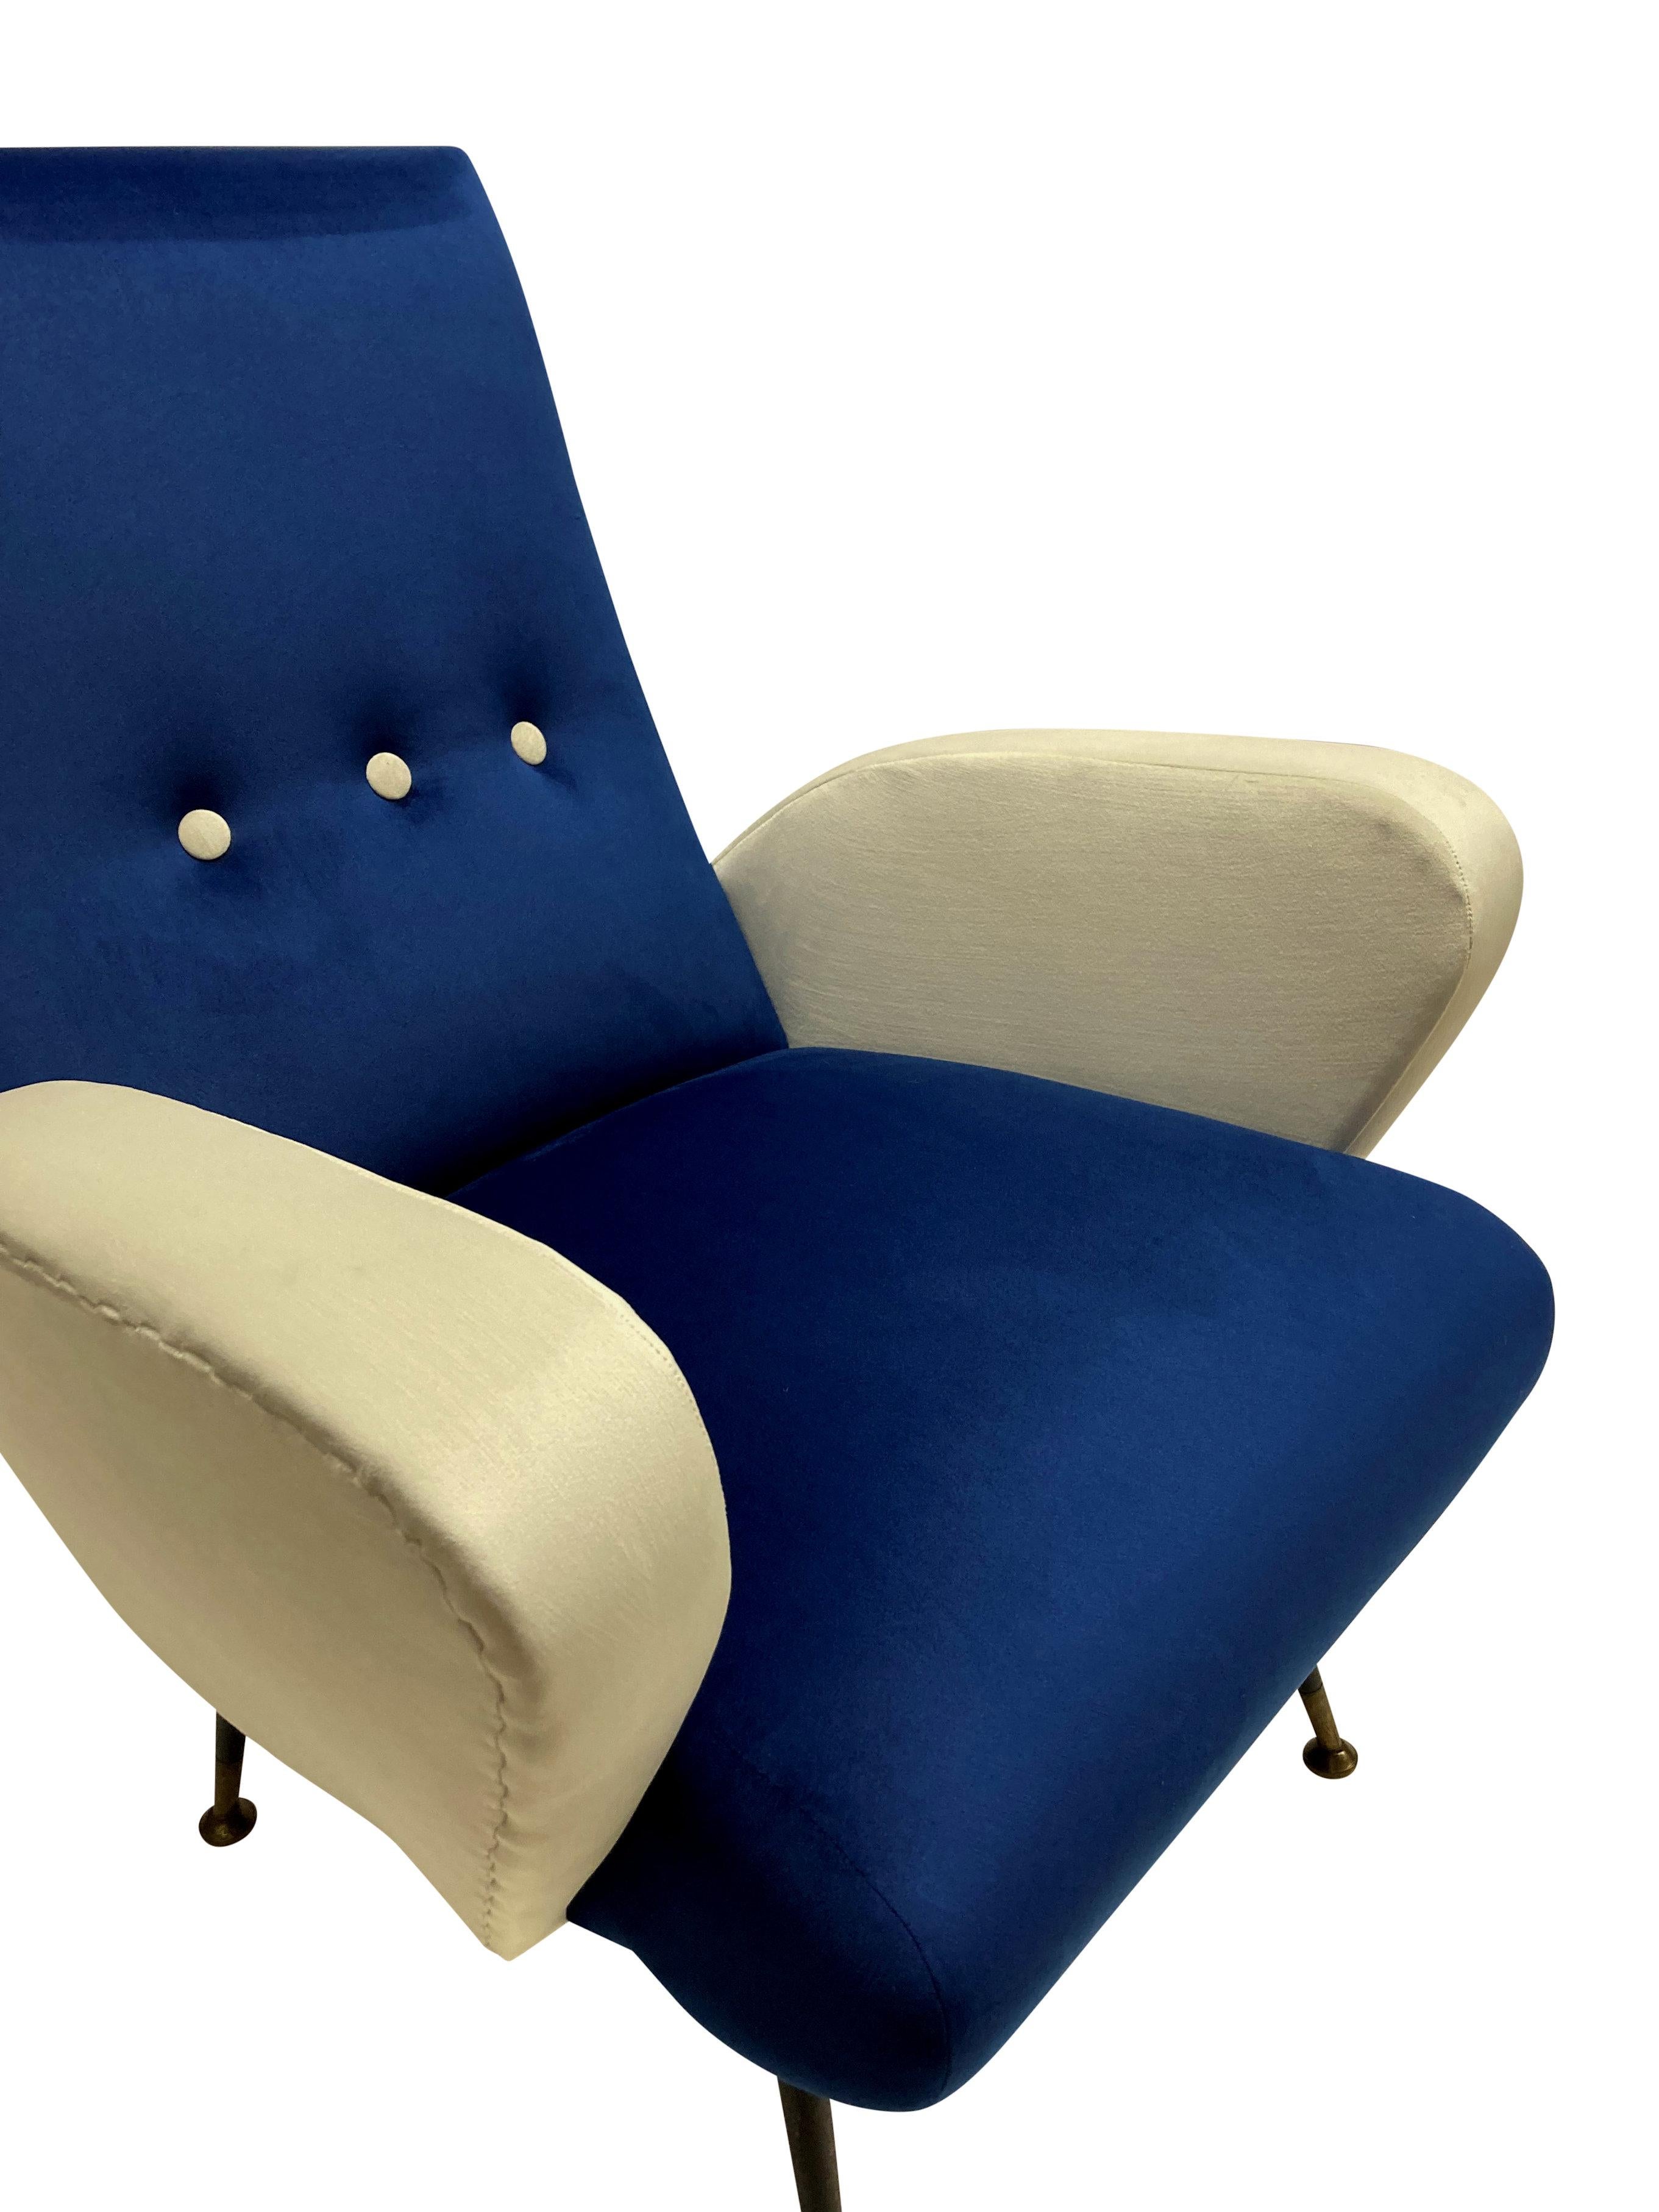 A pair of Italian mid-century armchairs by Nino Zoncada. On taperinglegs and newly upholstered in blue & cream velvet.